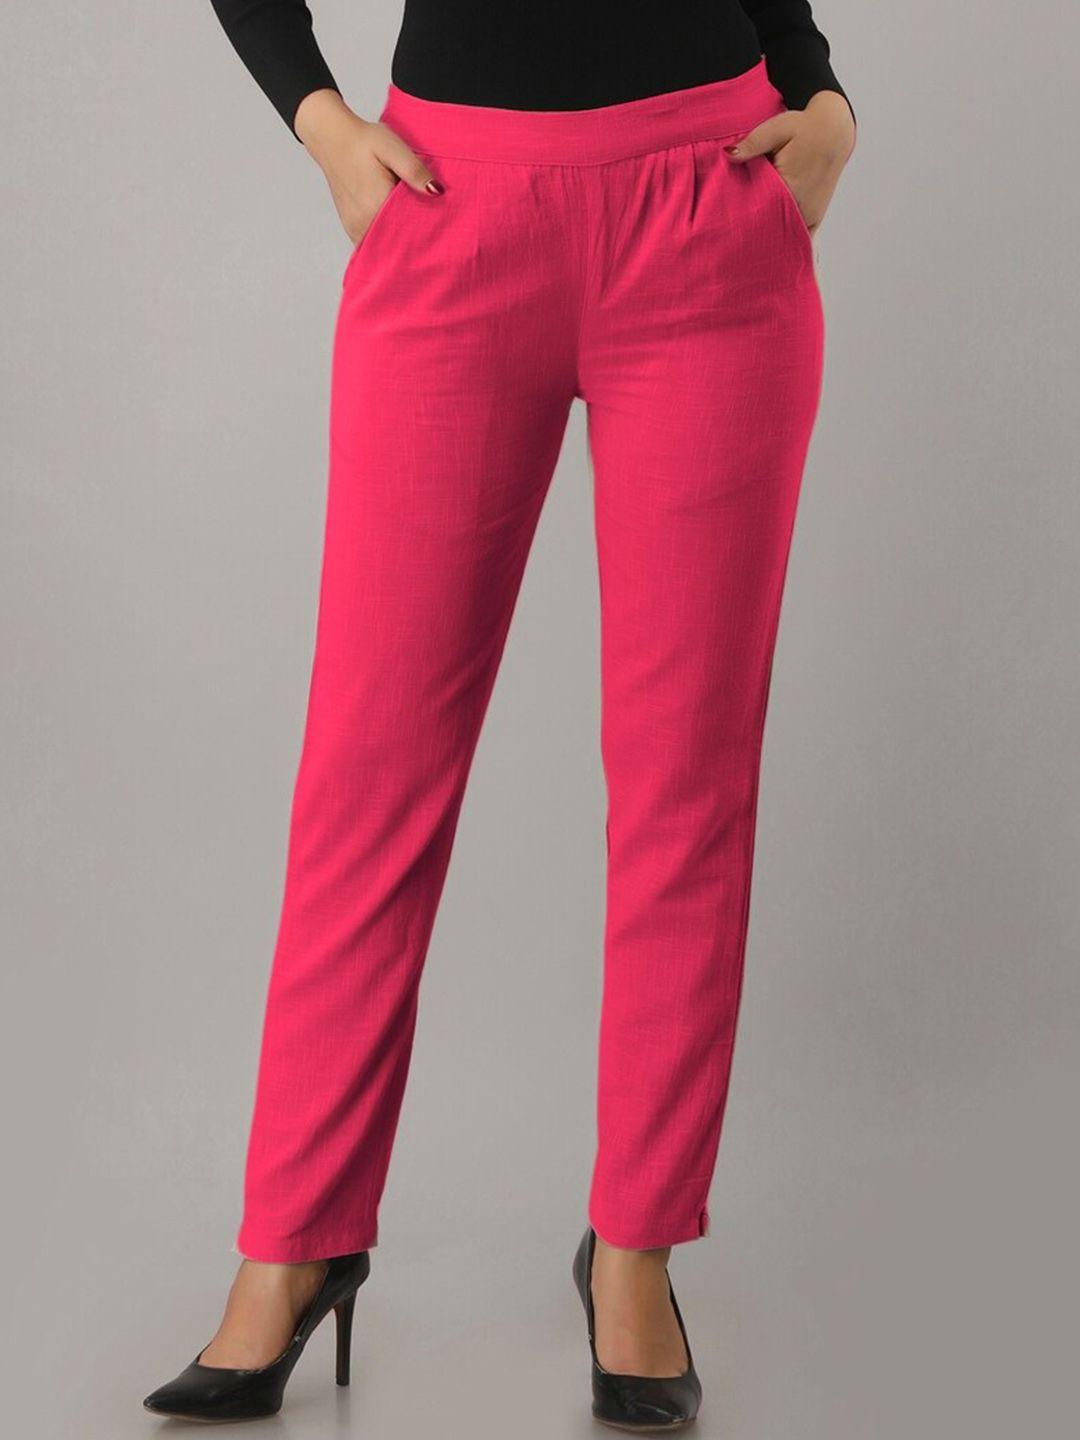 here&now women relaxed mid-rise cotton plain formal trousers trousers